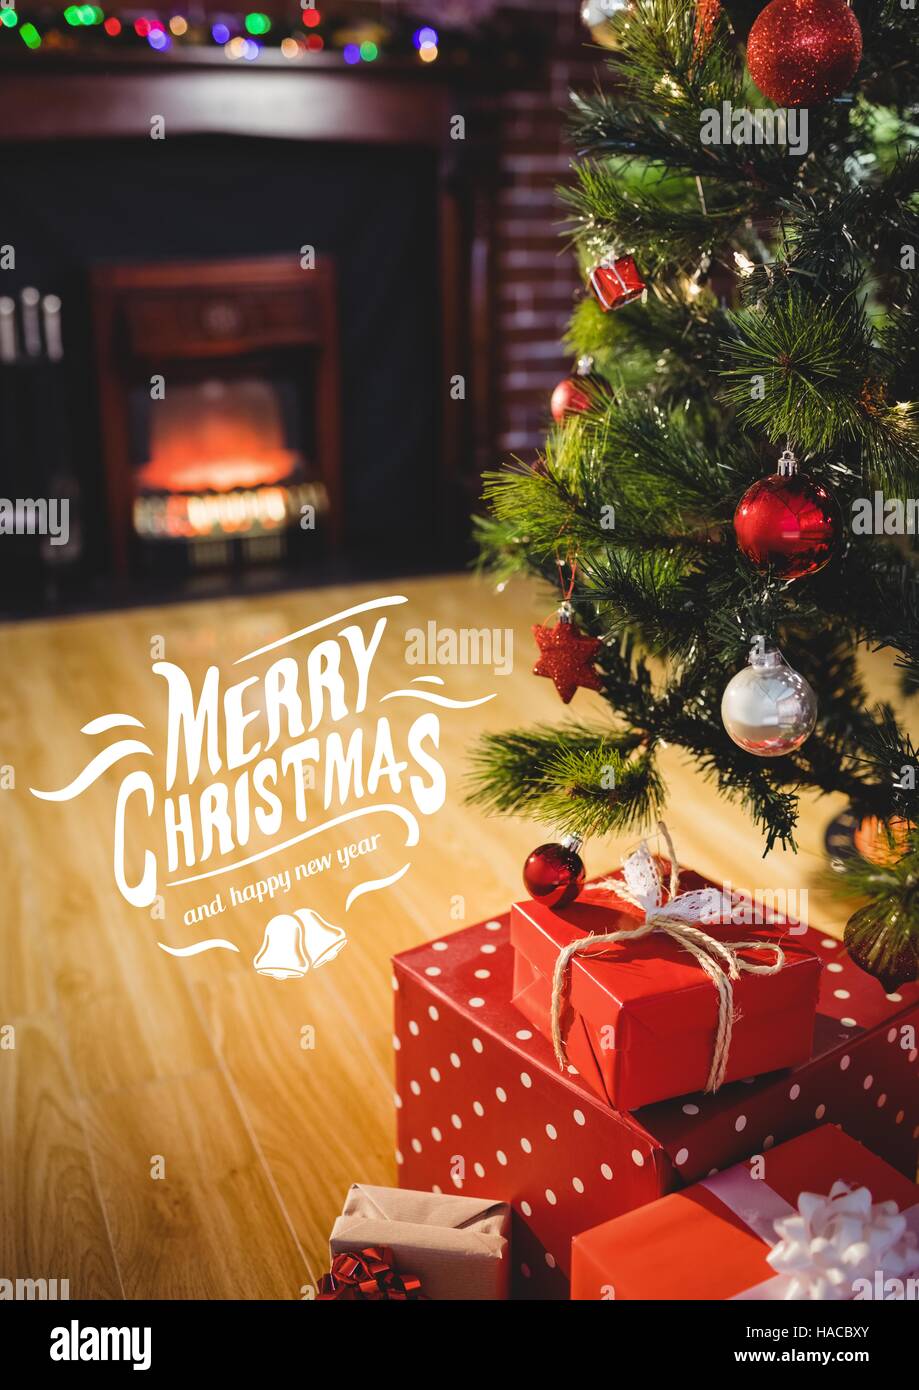 Digitally composite image of merry christmas message against christmas tree Stock Photo